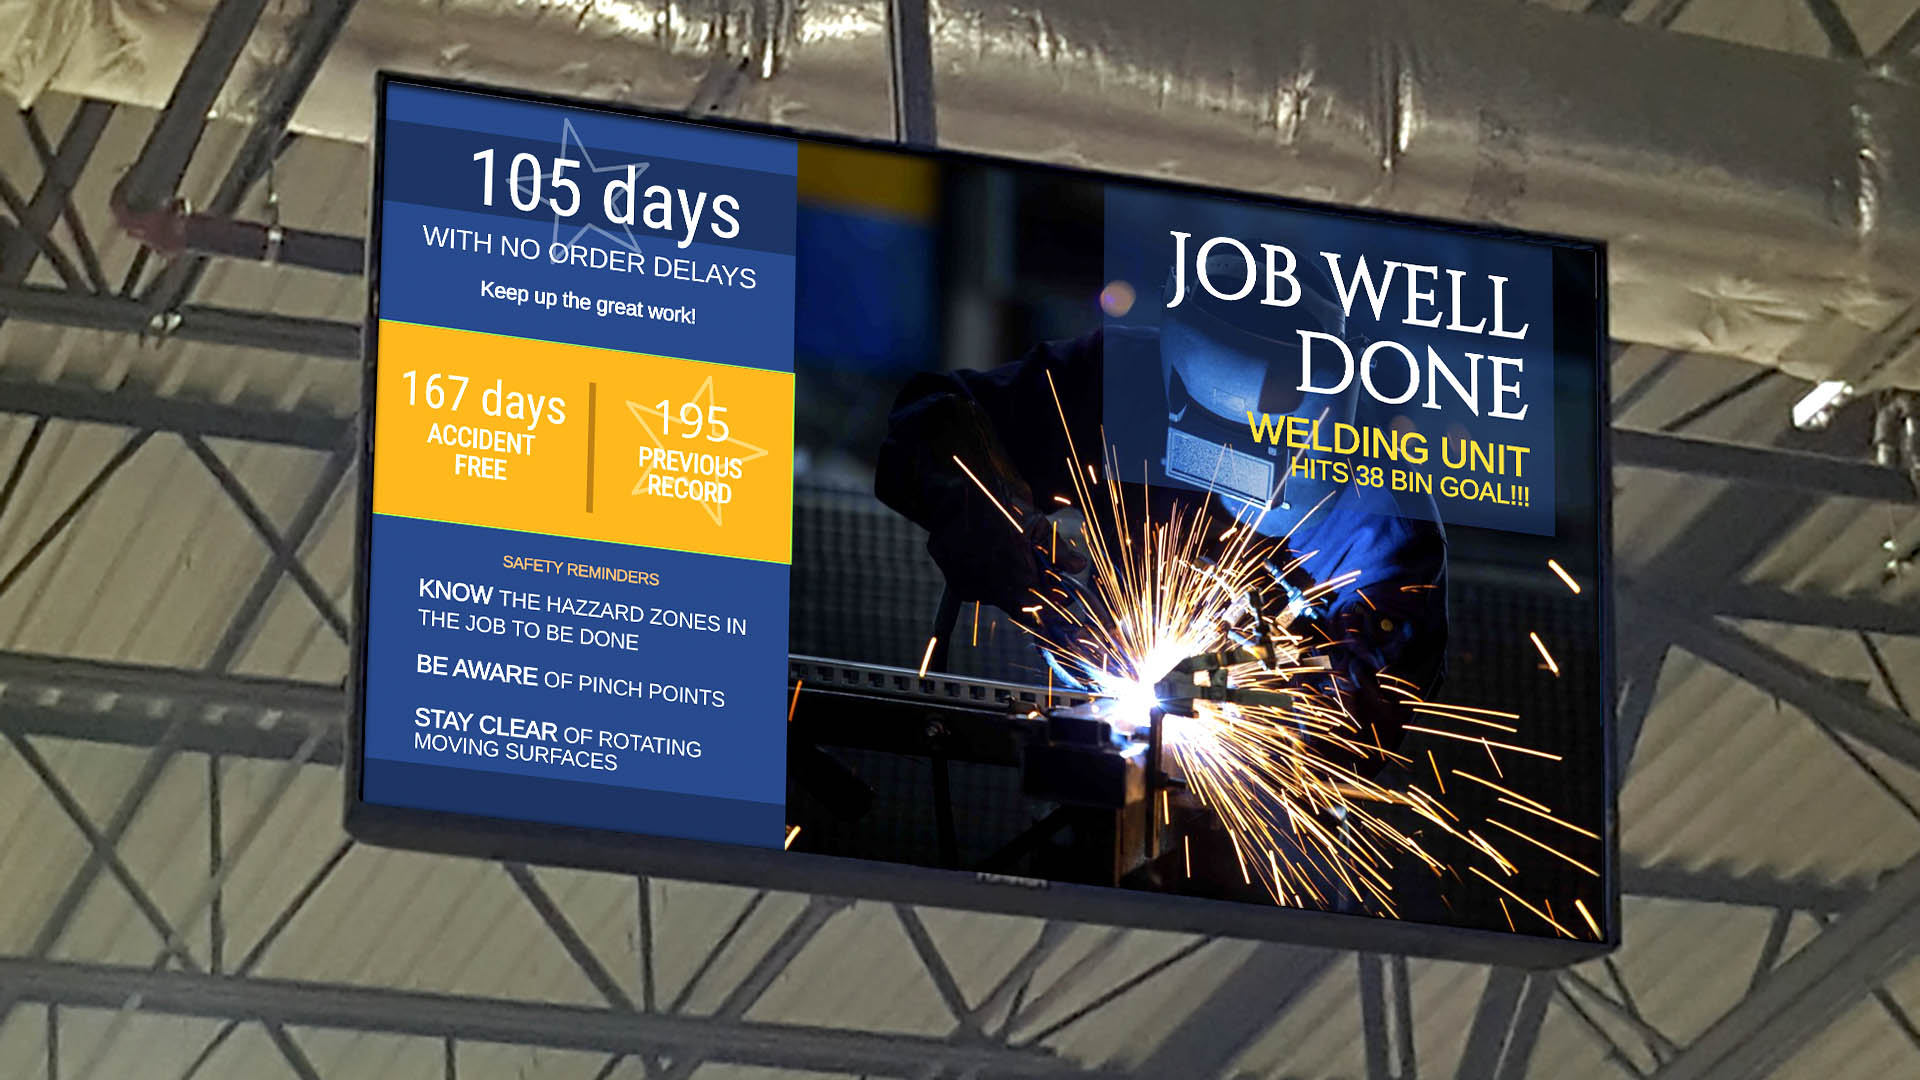 Arreya Digital Signage plays in a manufacturing facility showing the number of days without an accident